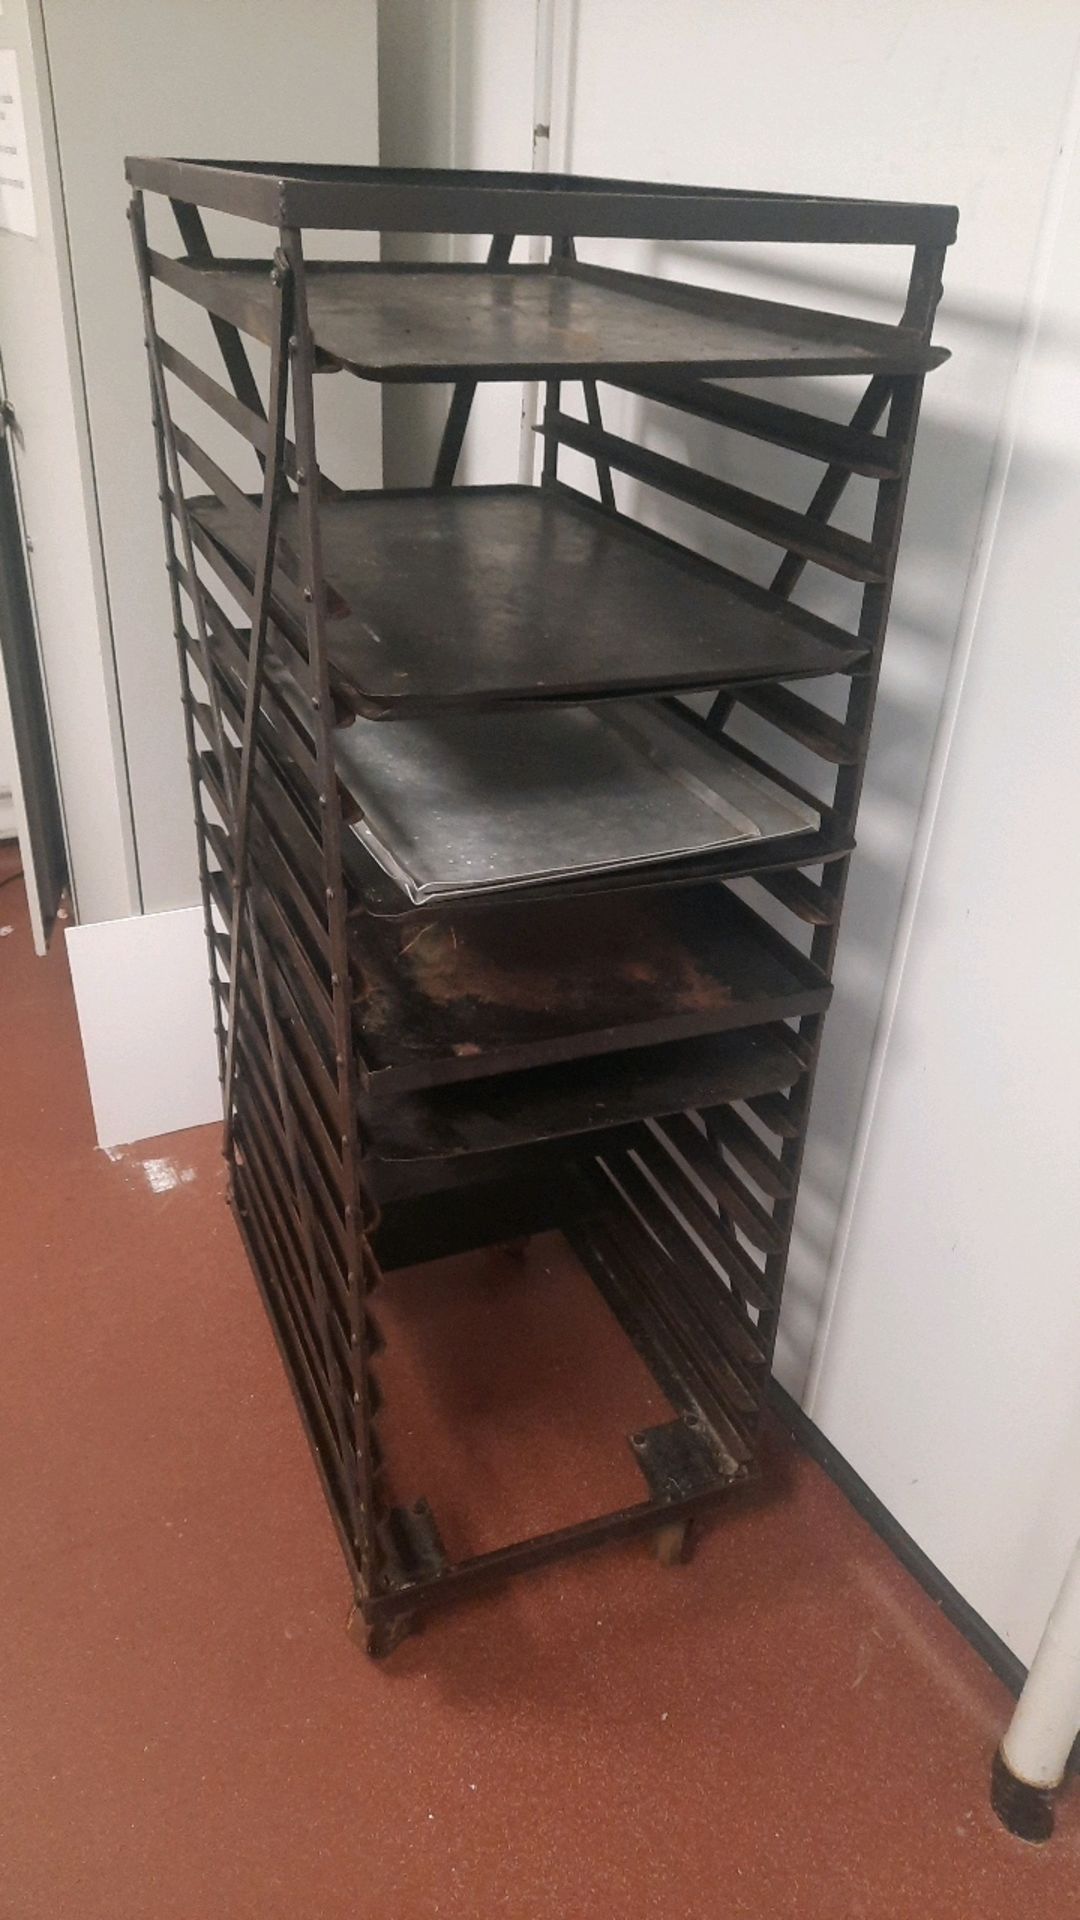 Bakery Tray Rack Trolley - Image 2 of 4